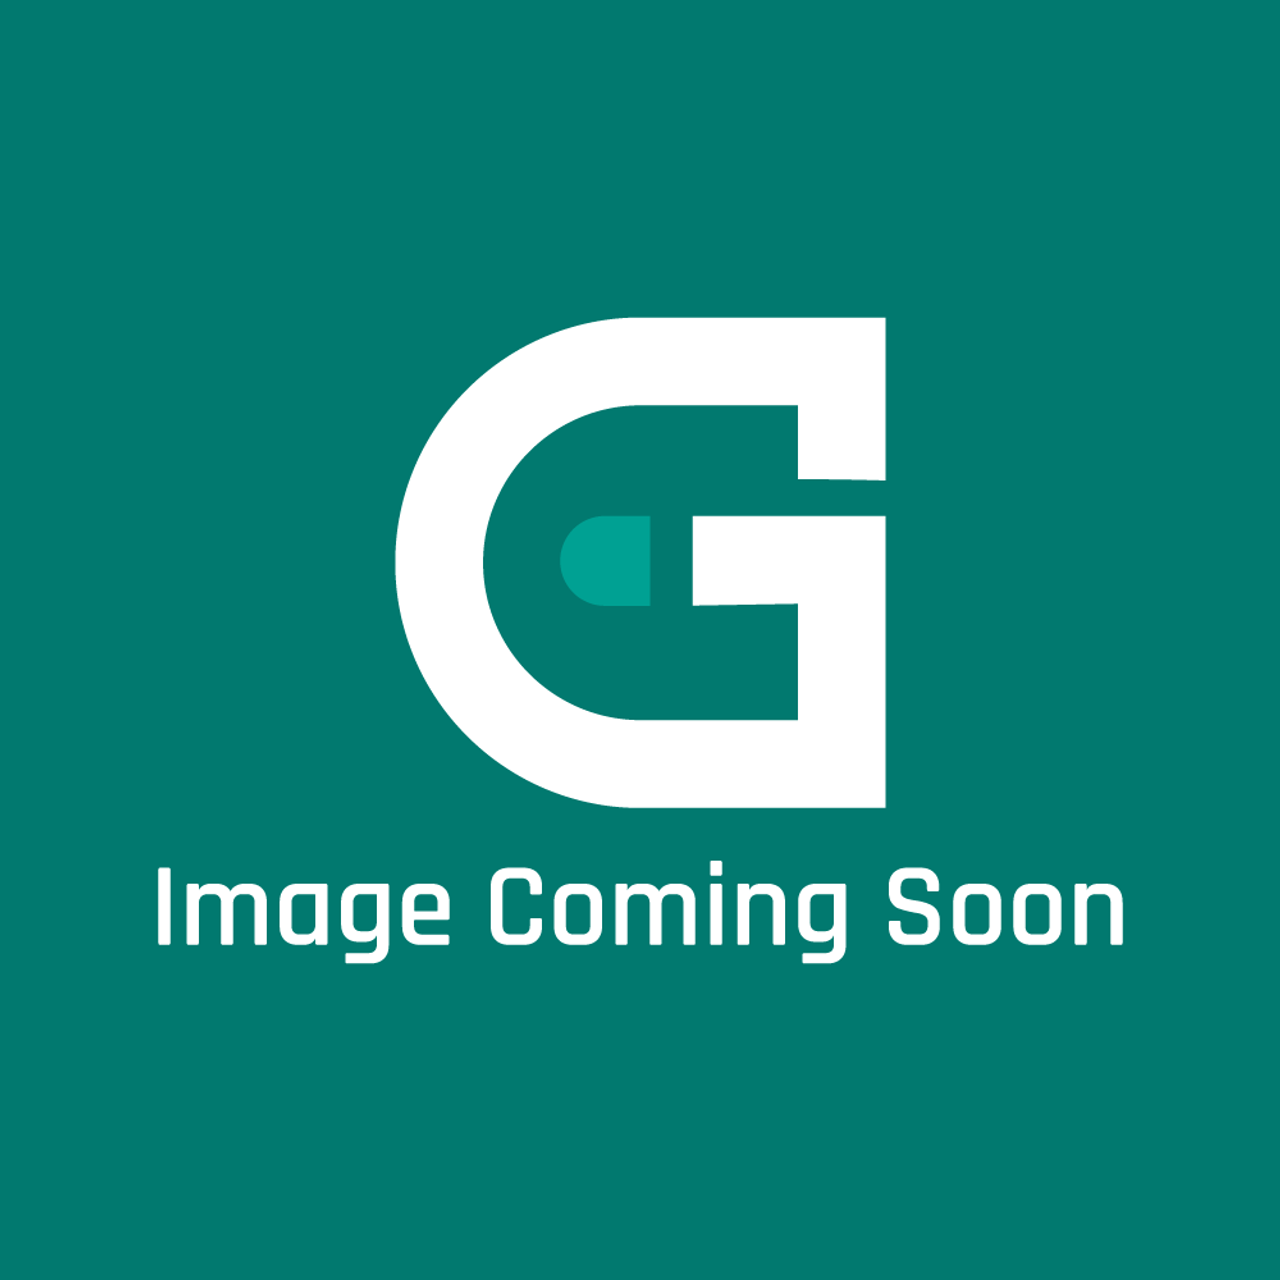 GE Appliances 15Z66 - 100001-06 Orifice Ring (22 I.D. X 6) - Image Coming Soon!